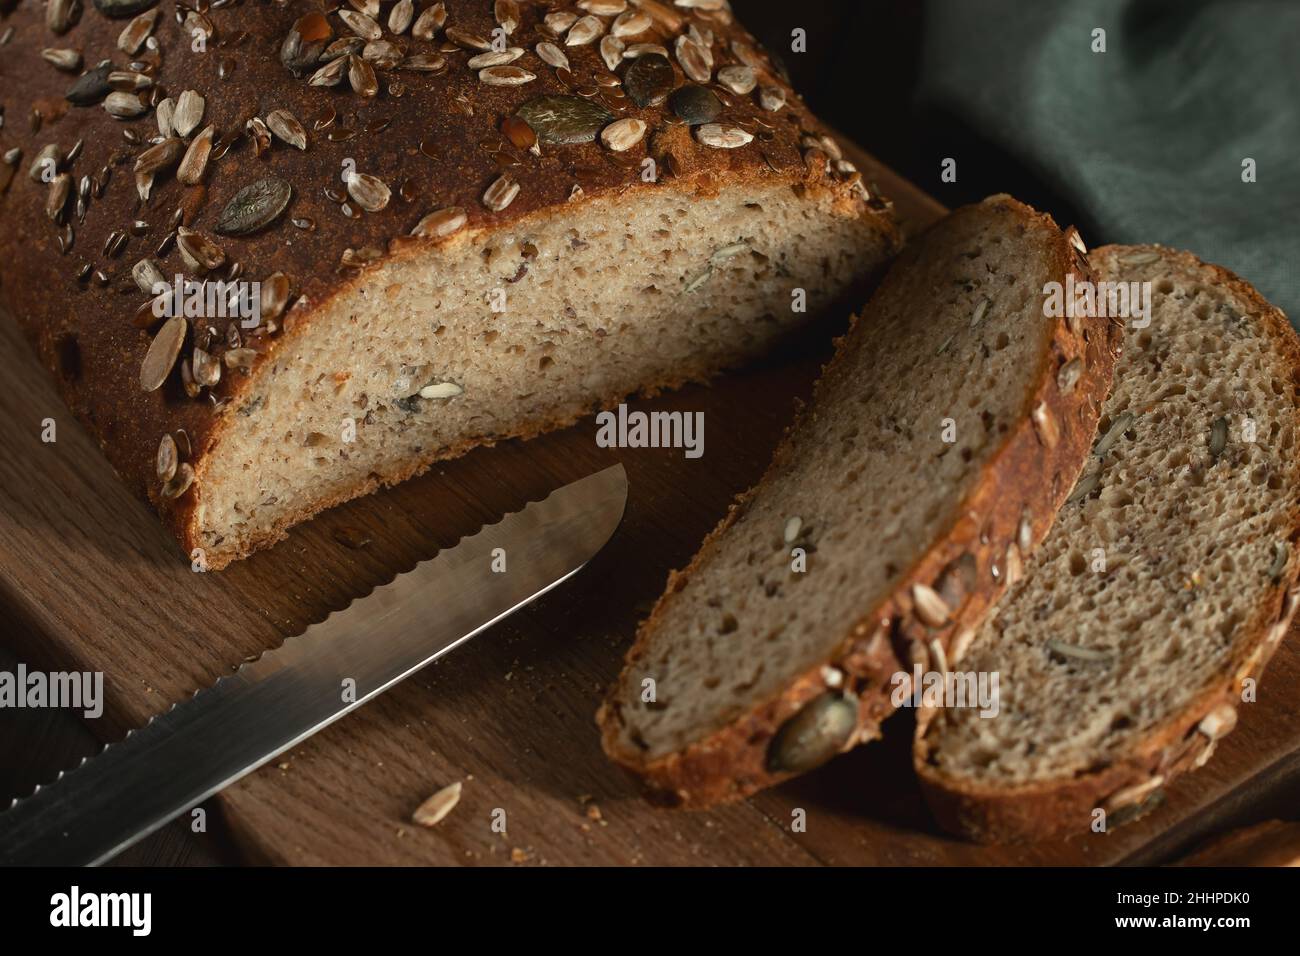 Sliced Homemade Whole Grain Bread with Seeds on a Cutting Board. Stock Photo